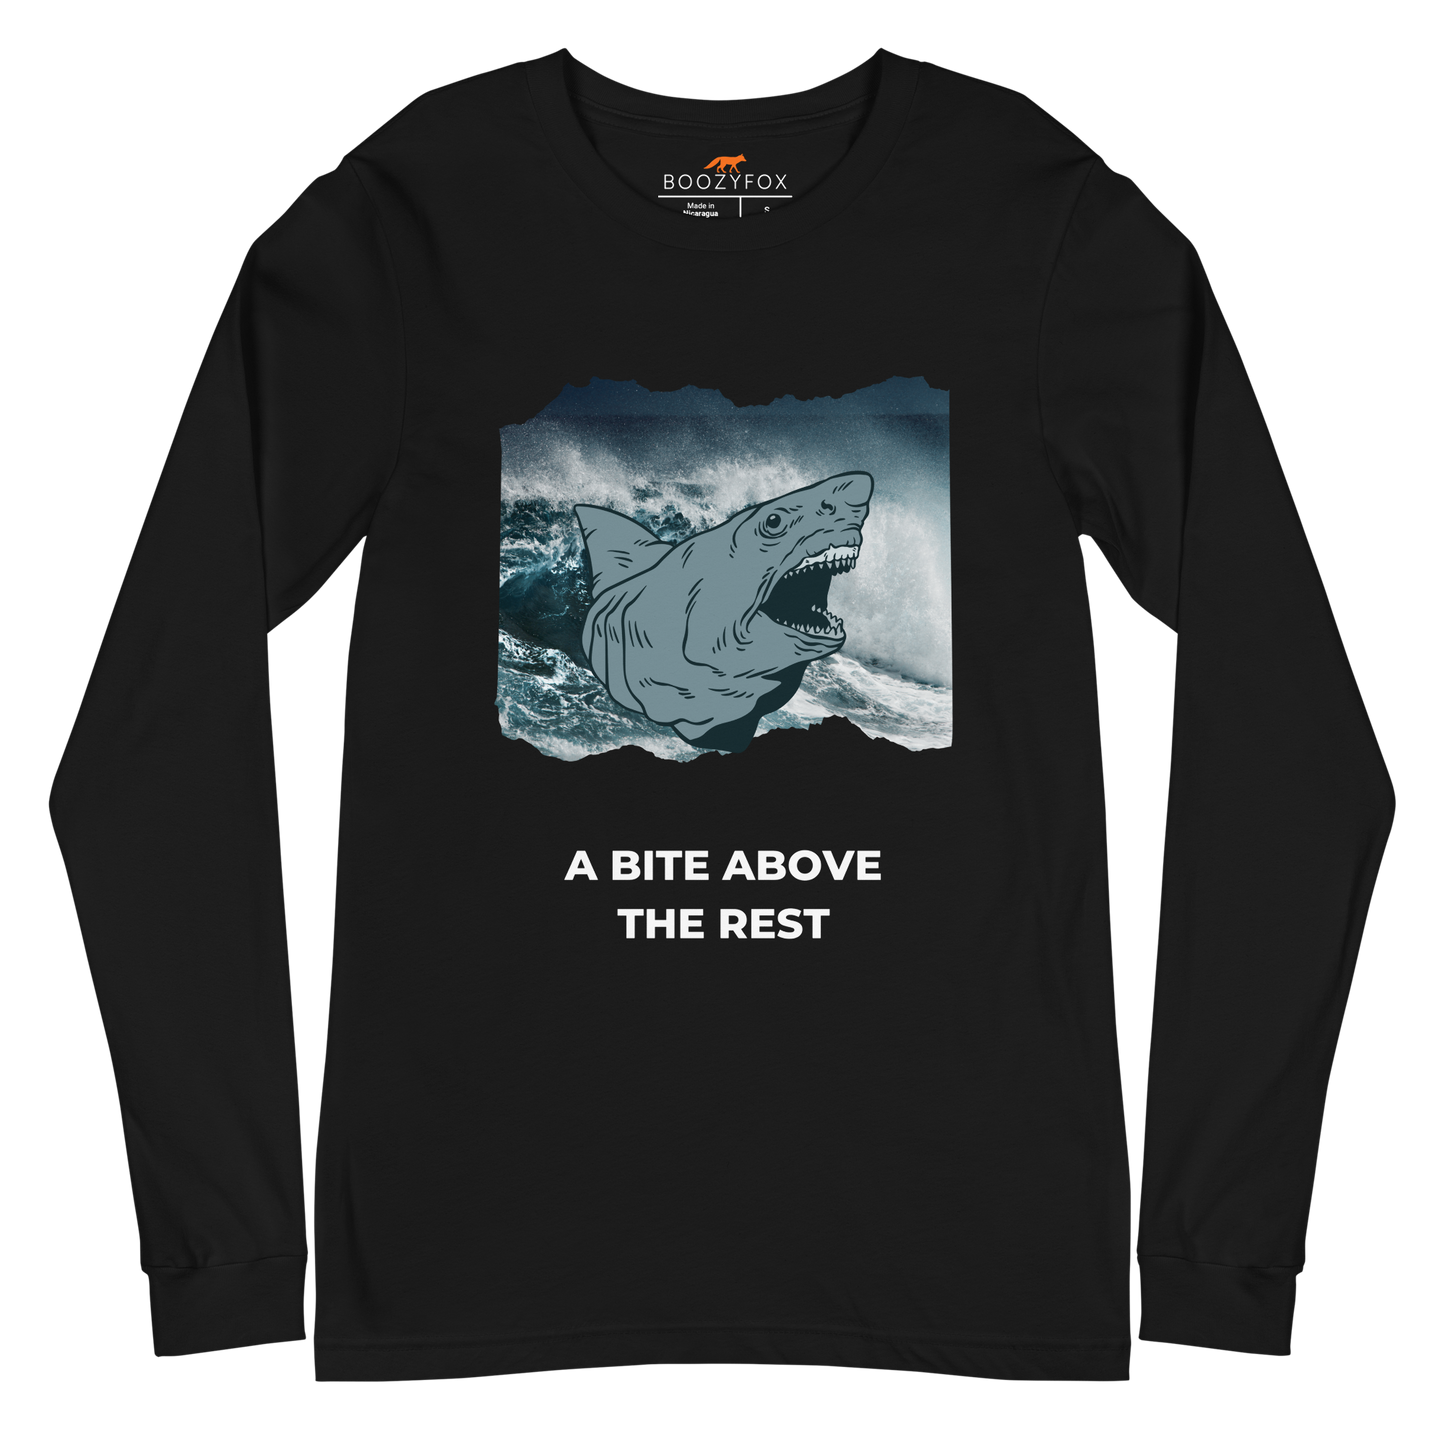 Black Megalodon Long Sleeve Tee featuring A Bite Above the Rest graphic on the chest - Funny Megalodon Long Sleeve Graphic Tees - Boozy Fox